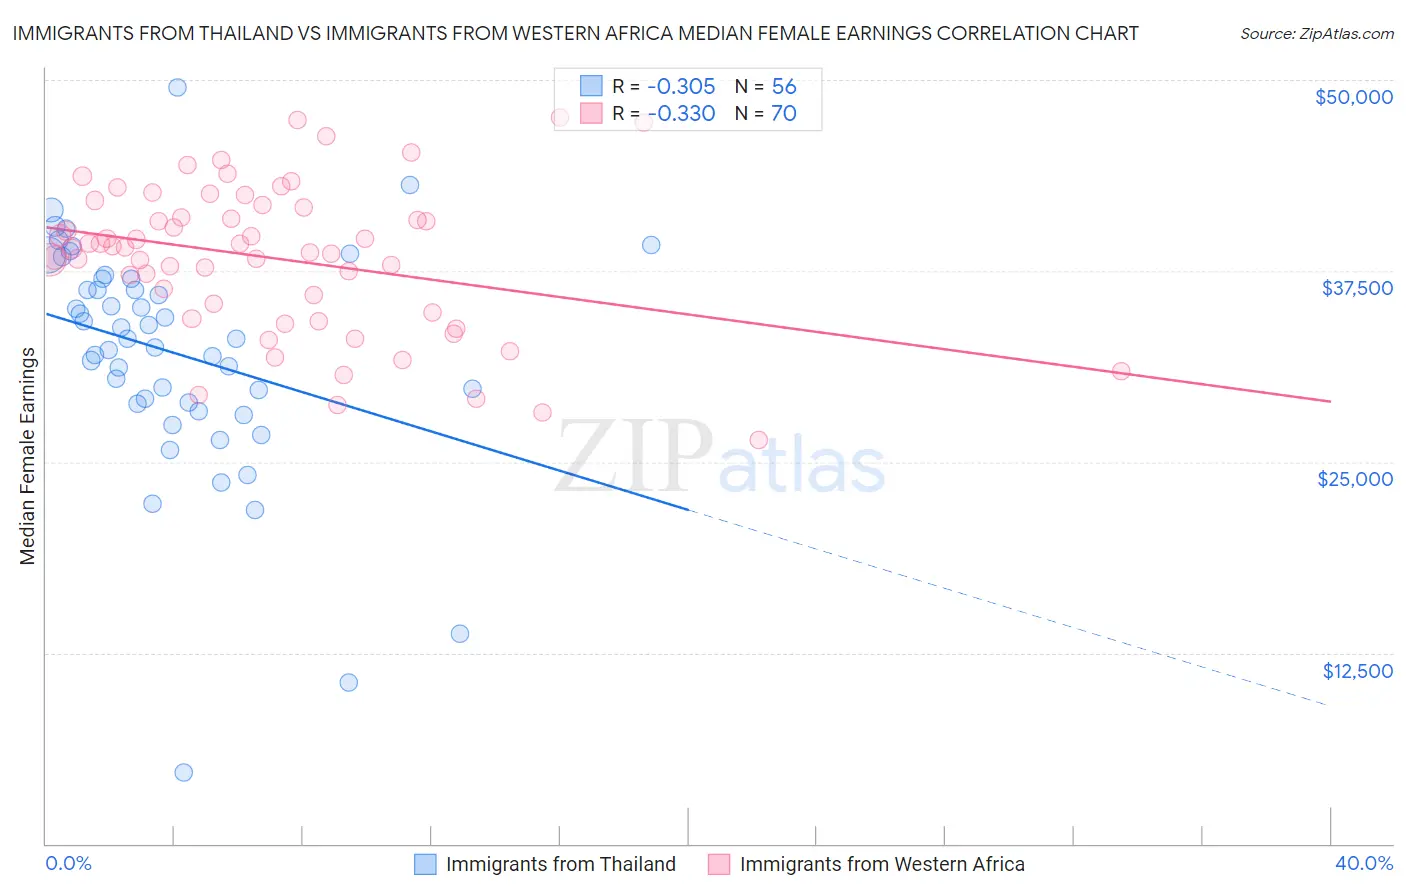 Immigrants from Thailand vs Immigrants from Western Africa Median Female Earnings